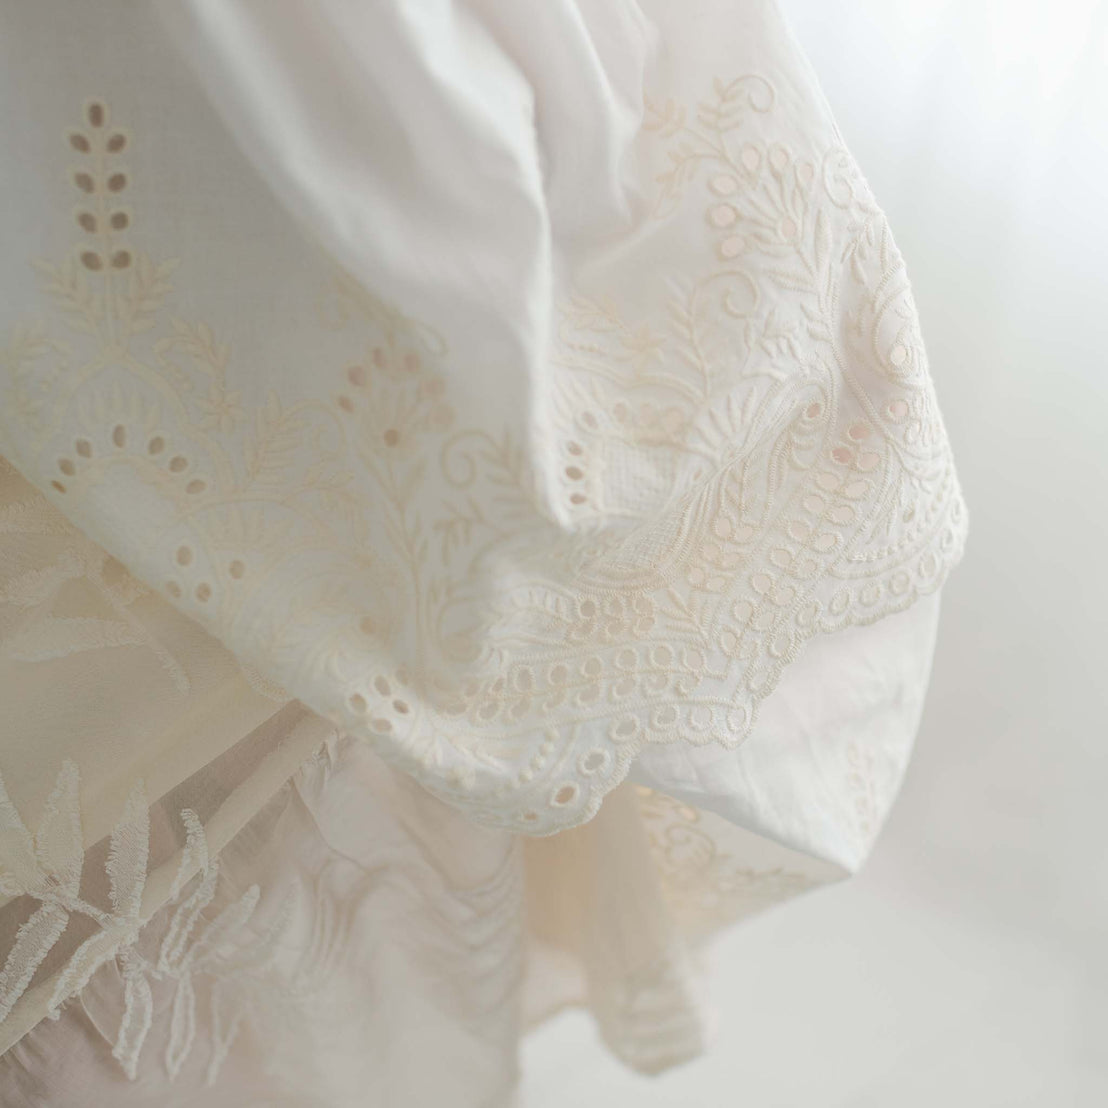 Close-up of the Ingrid Tiered Gown & Bonnet, an elegant piece featuring intricate embroidery and lace detailing, perfect for a handmade girls' gown. The fabric appears slightly layered, with soft light illuminating its delicate patterns and textures, making it ideal for a baby blessing gown or christening gown.